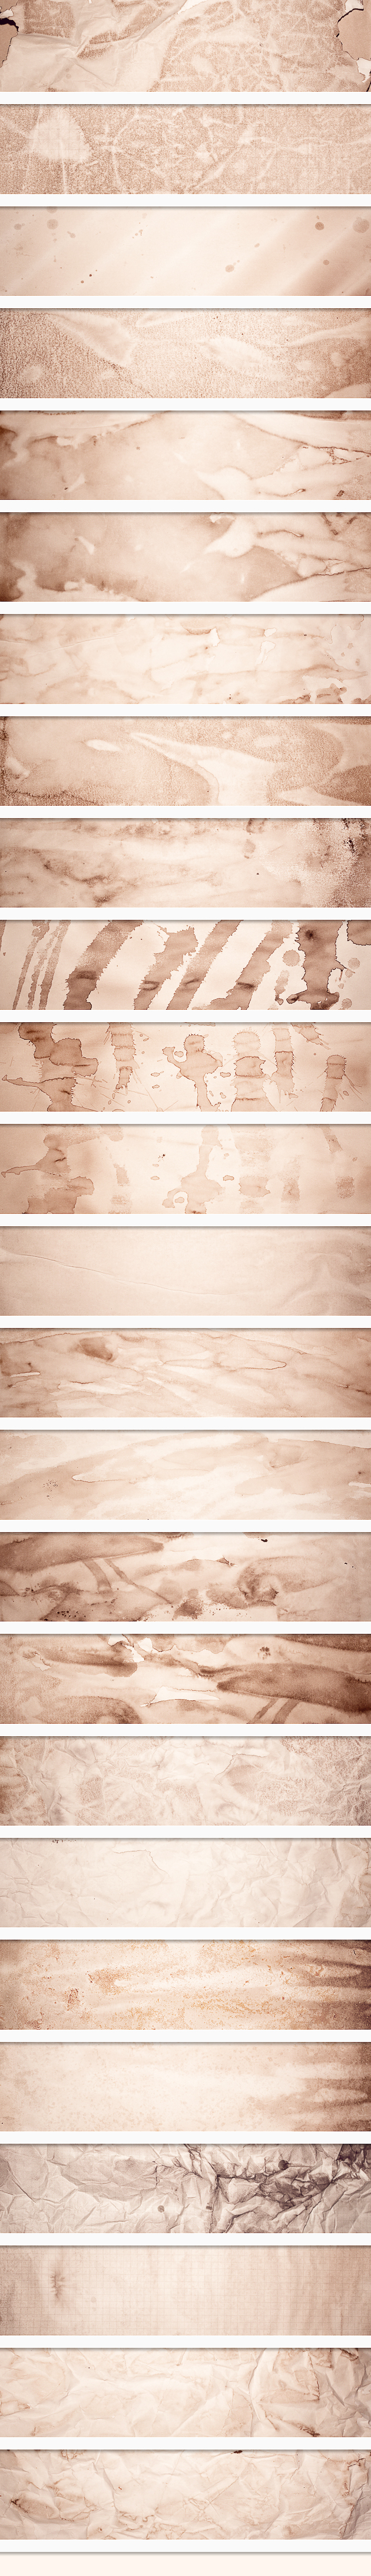 Stained Paper Textures Set 2 2